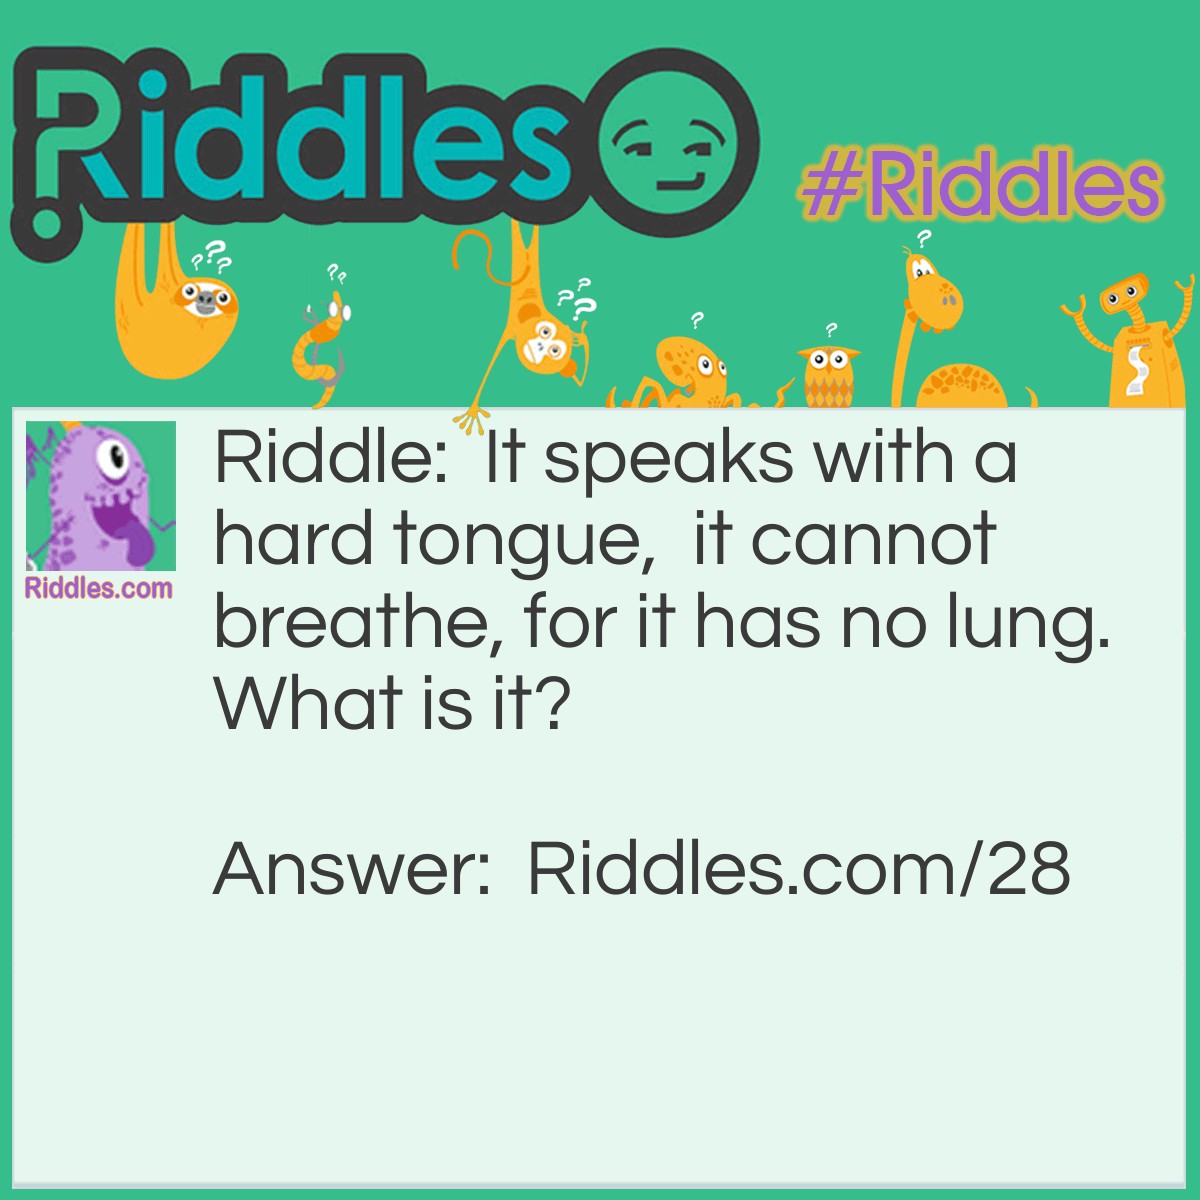 Riddle: It speaks with a hard tongue, it cannot breathe, for it has no lung. What is it? Answer: A Bell.